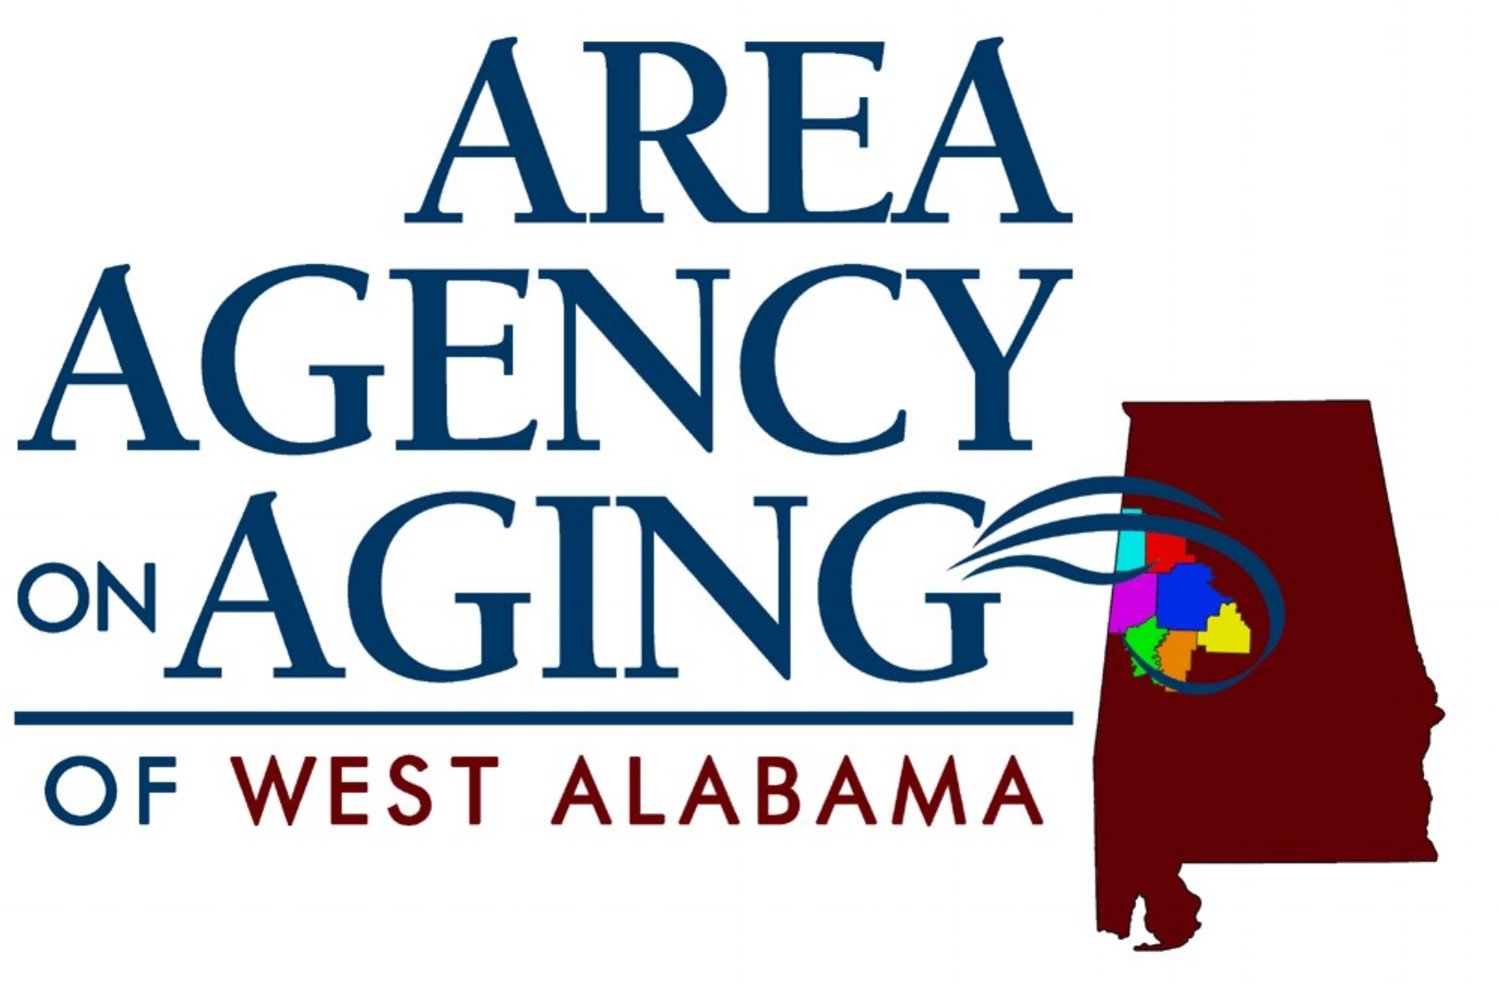 Area Agency on Aging of West Alabama